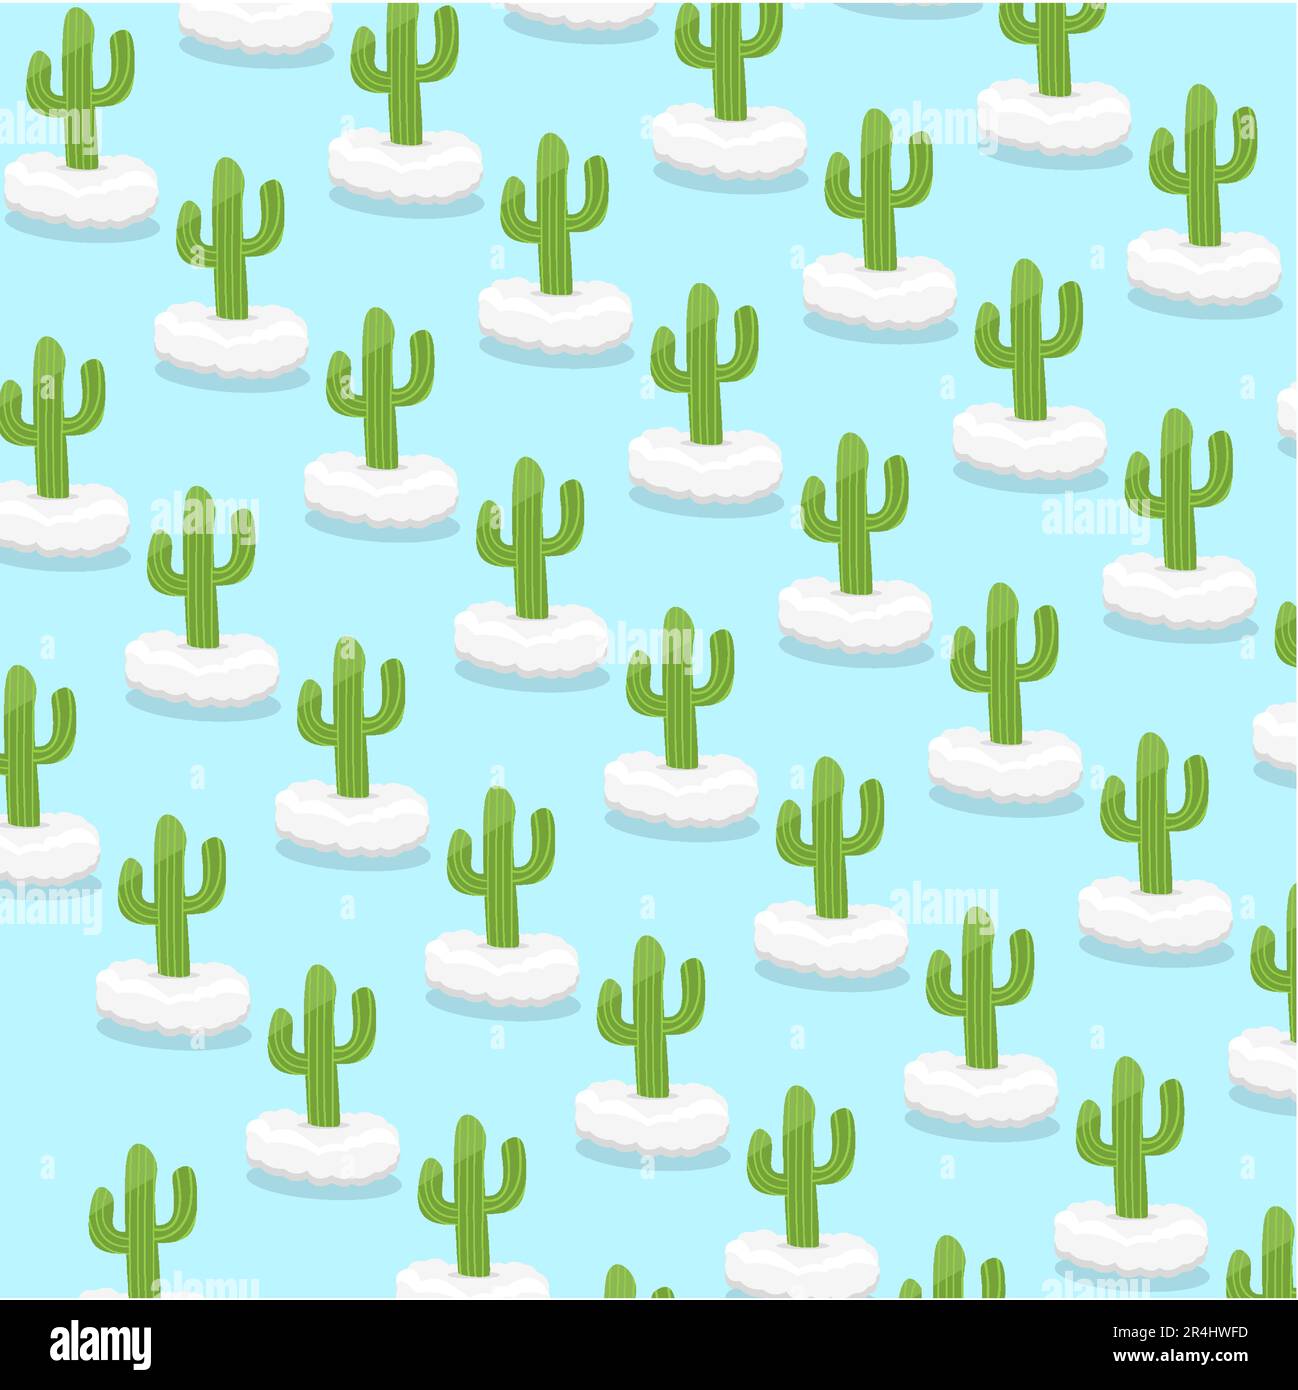 Cactus Patterns Background cartoon. Vector and Illustrations Stock Vector